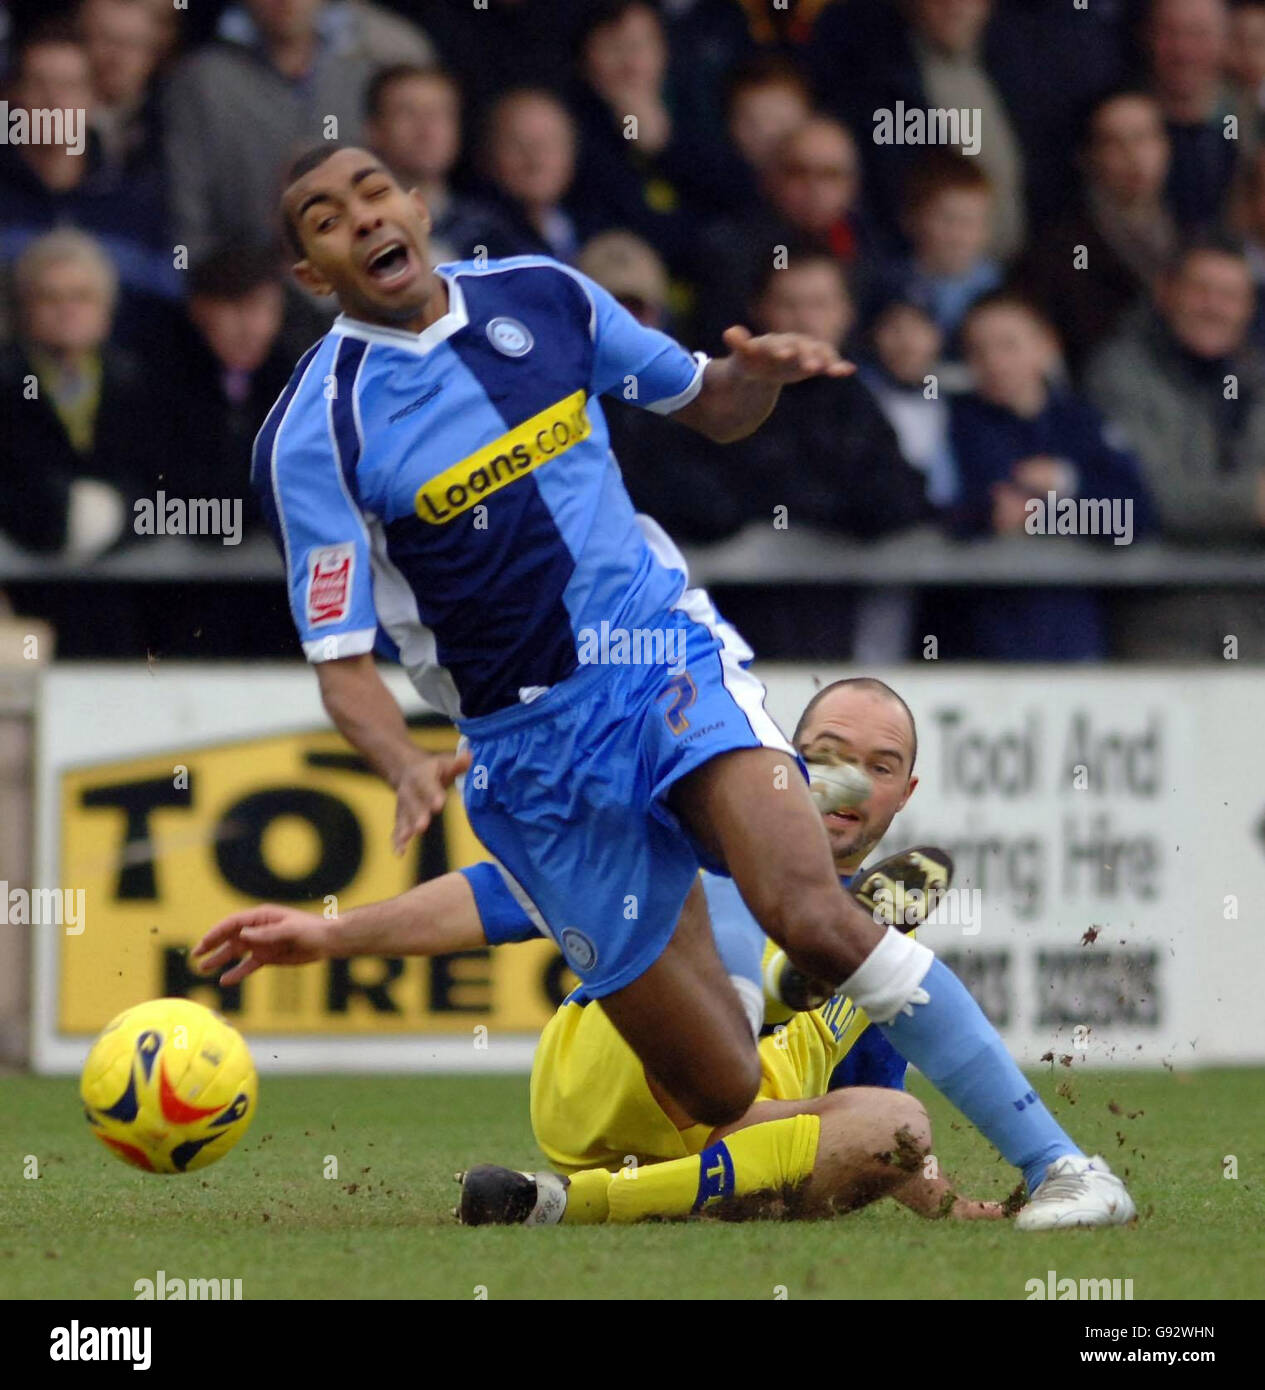 Wycome Wanderers' Kevin Betsy (L) in action with Torquay's Darren Garner during the Coca-Cola League Two match at Plainmoor, Torquay, Monday December 26, 2005. PRESS ASSOCIATION Photo. Photo credit should read: Neil Munns/PA NO UNOFFICIAL CLUB WEBSITE USE. Stock Photo